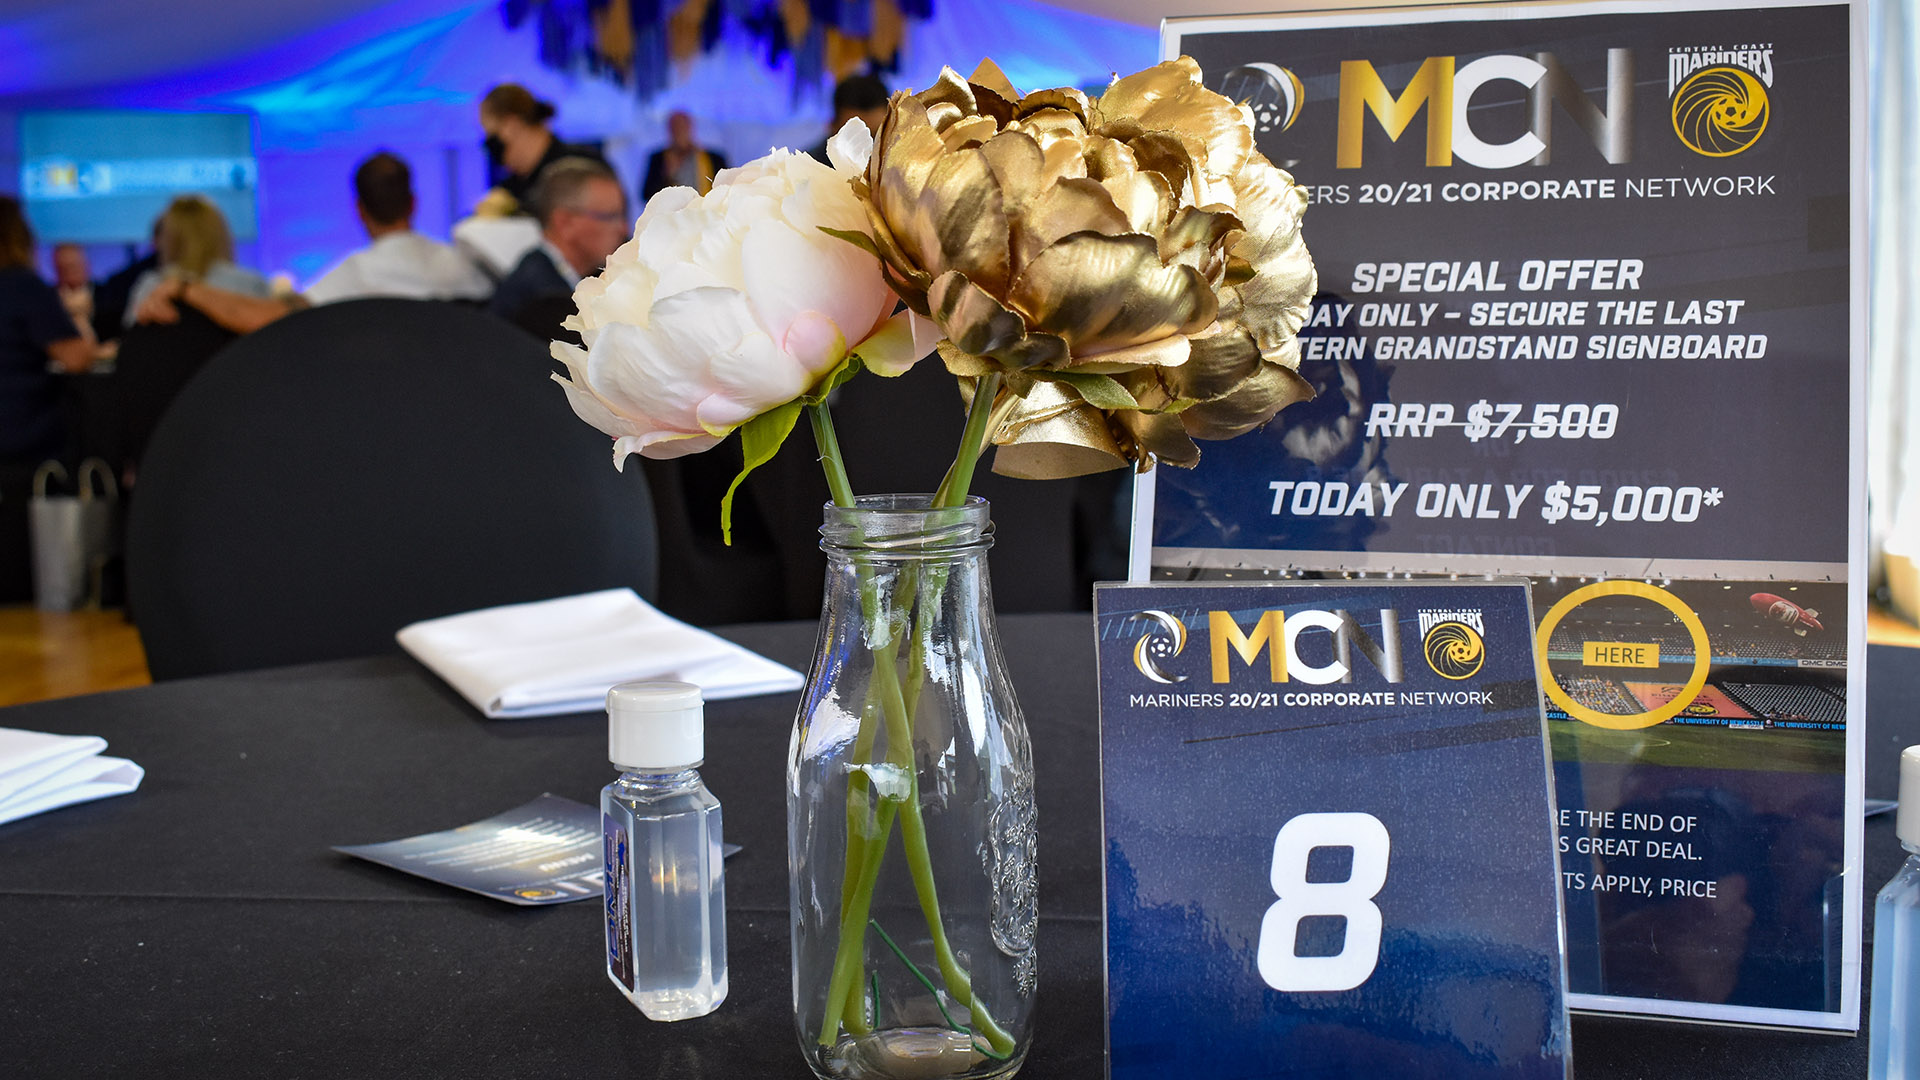 Mariners Corporate Network kick off new pre-match function